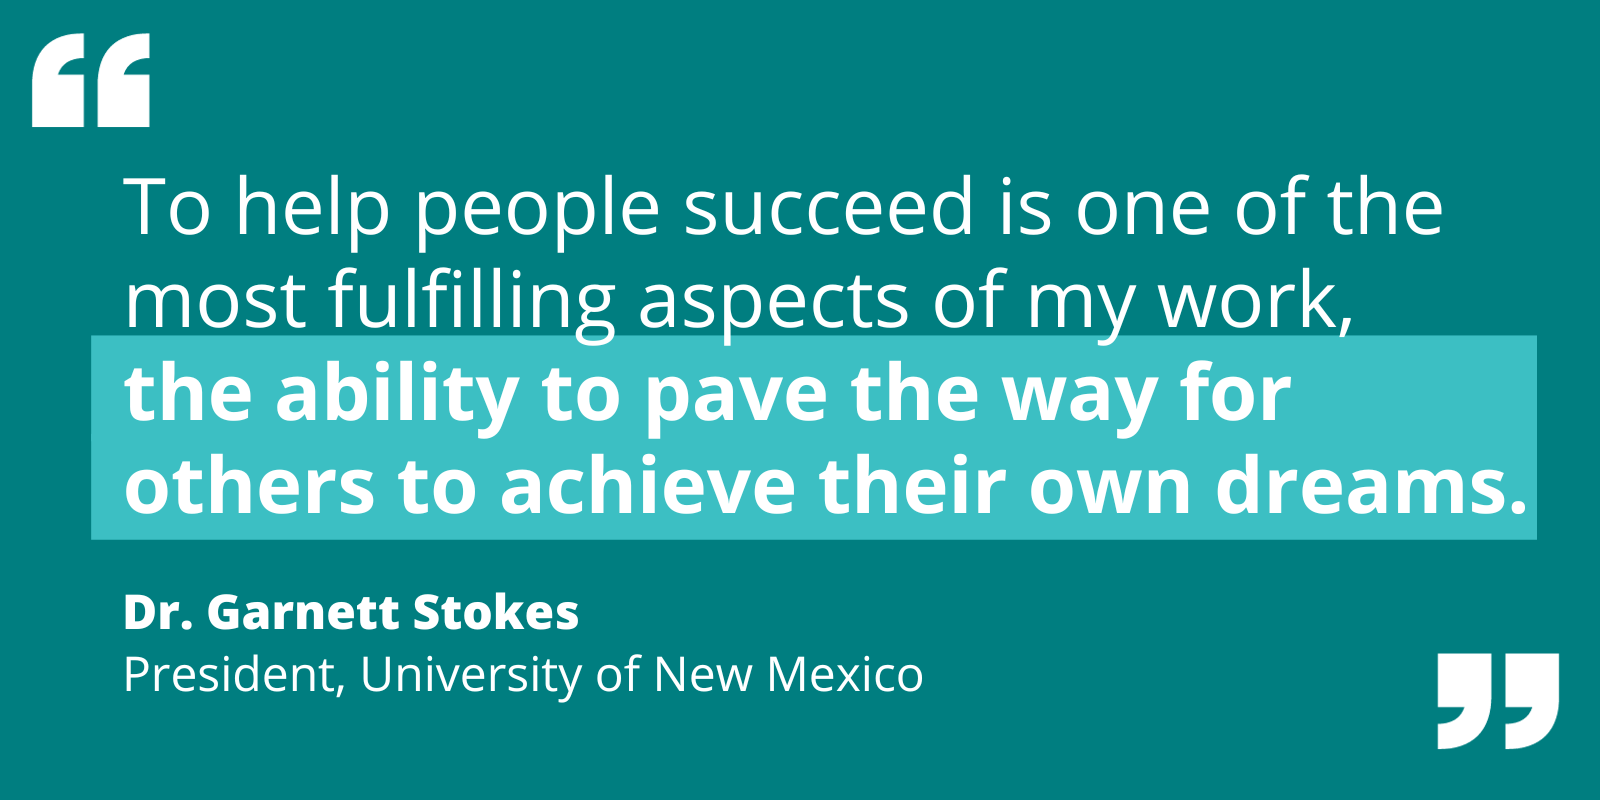 Quote by Garnett Stokes re: finding fulfillment in her work through helping others succeed and achieve their dreams.